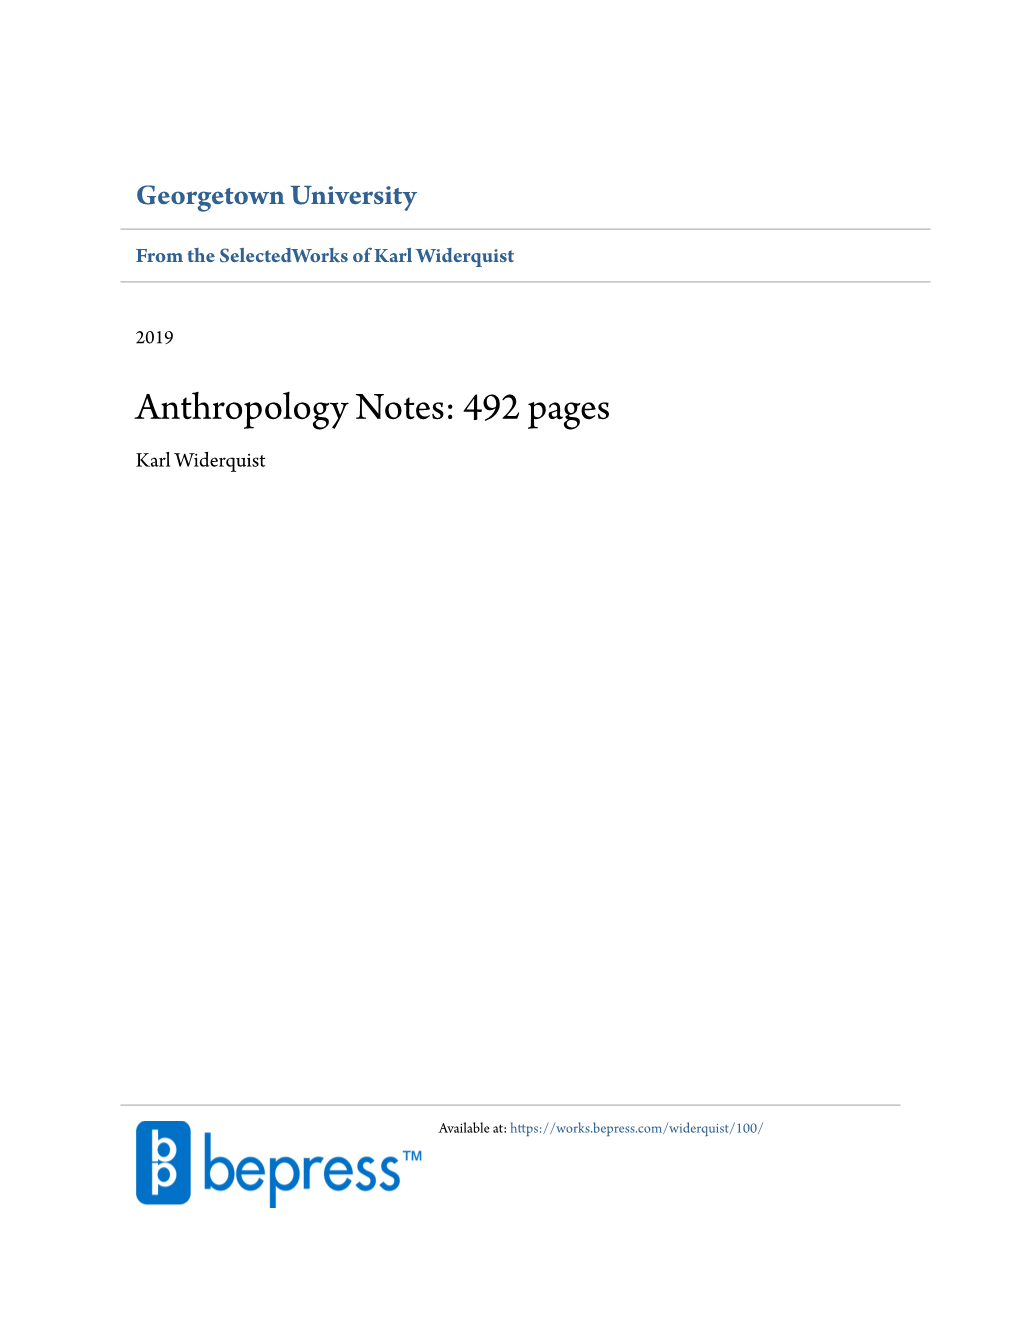 Anthropology Notes: 492 Pages Karl Widerquist